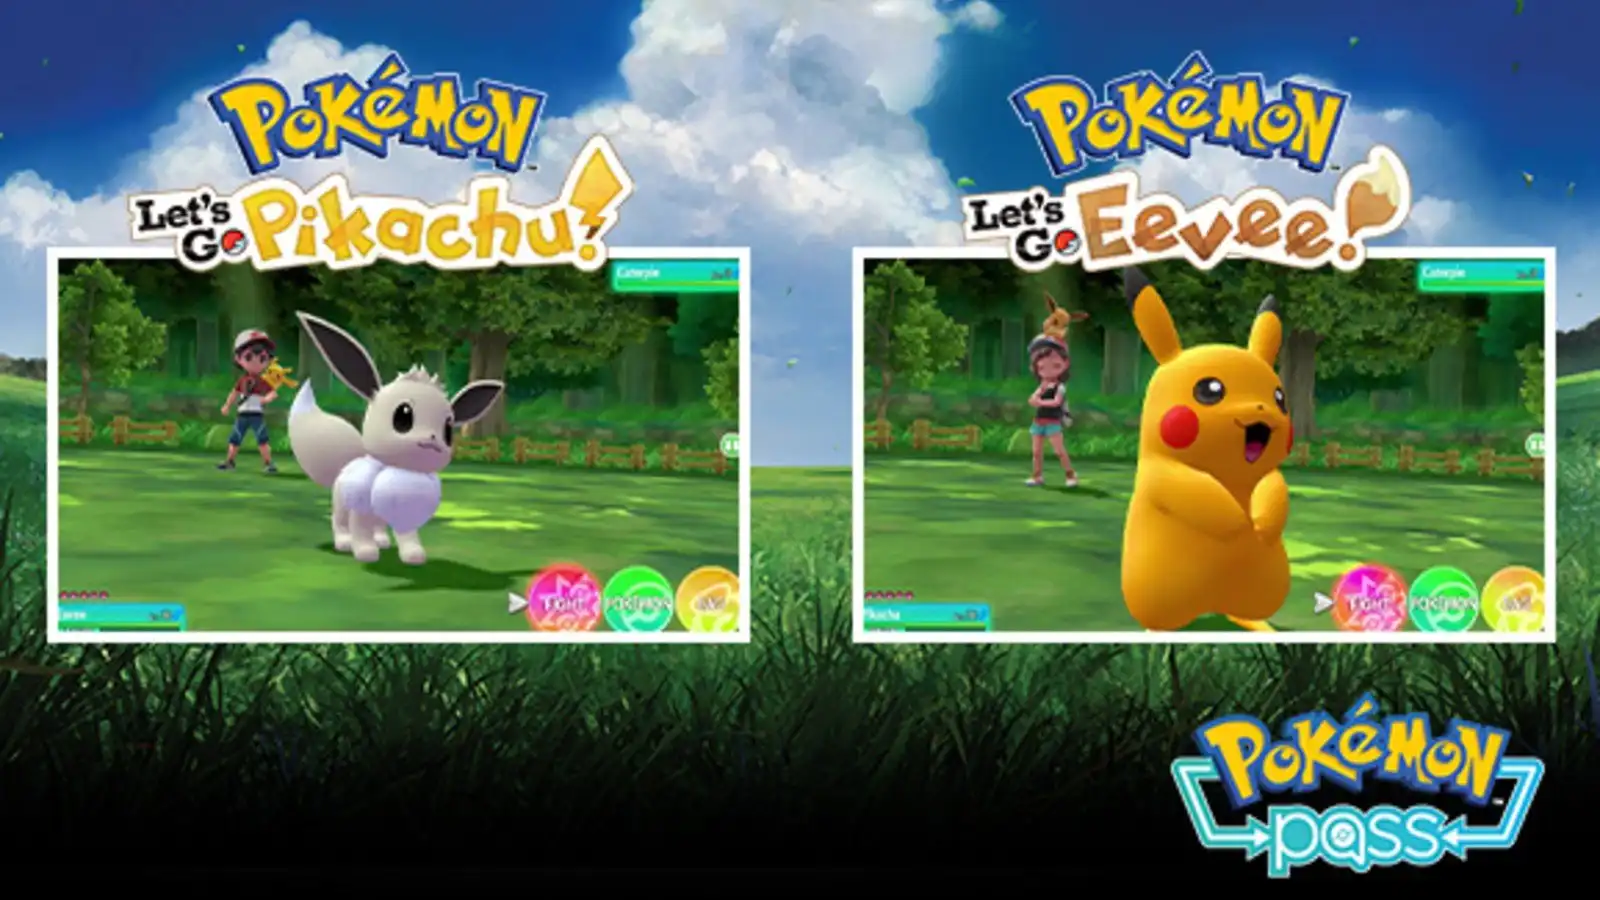 How to get a shiny Eevee or Pikachu in Pokémon Let